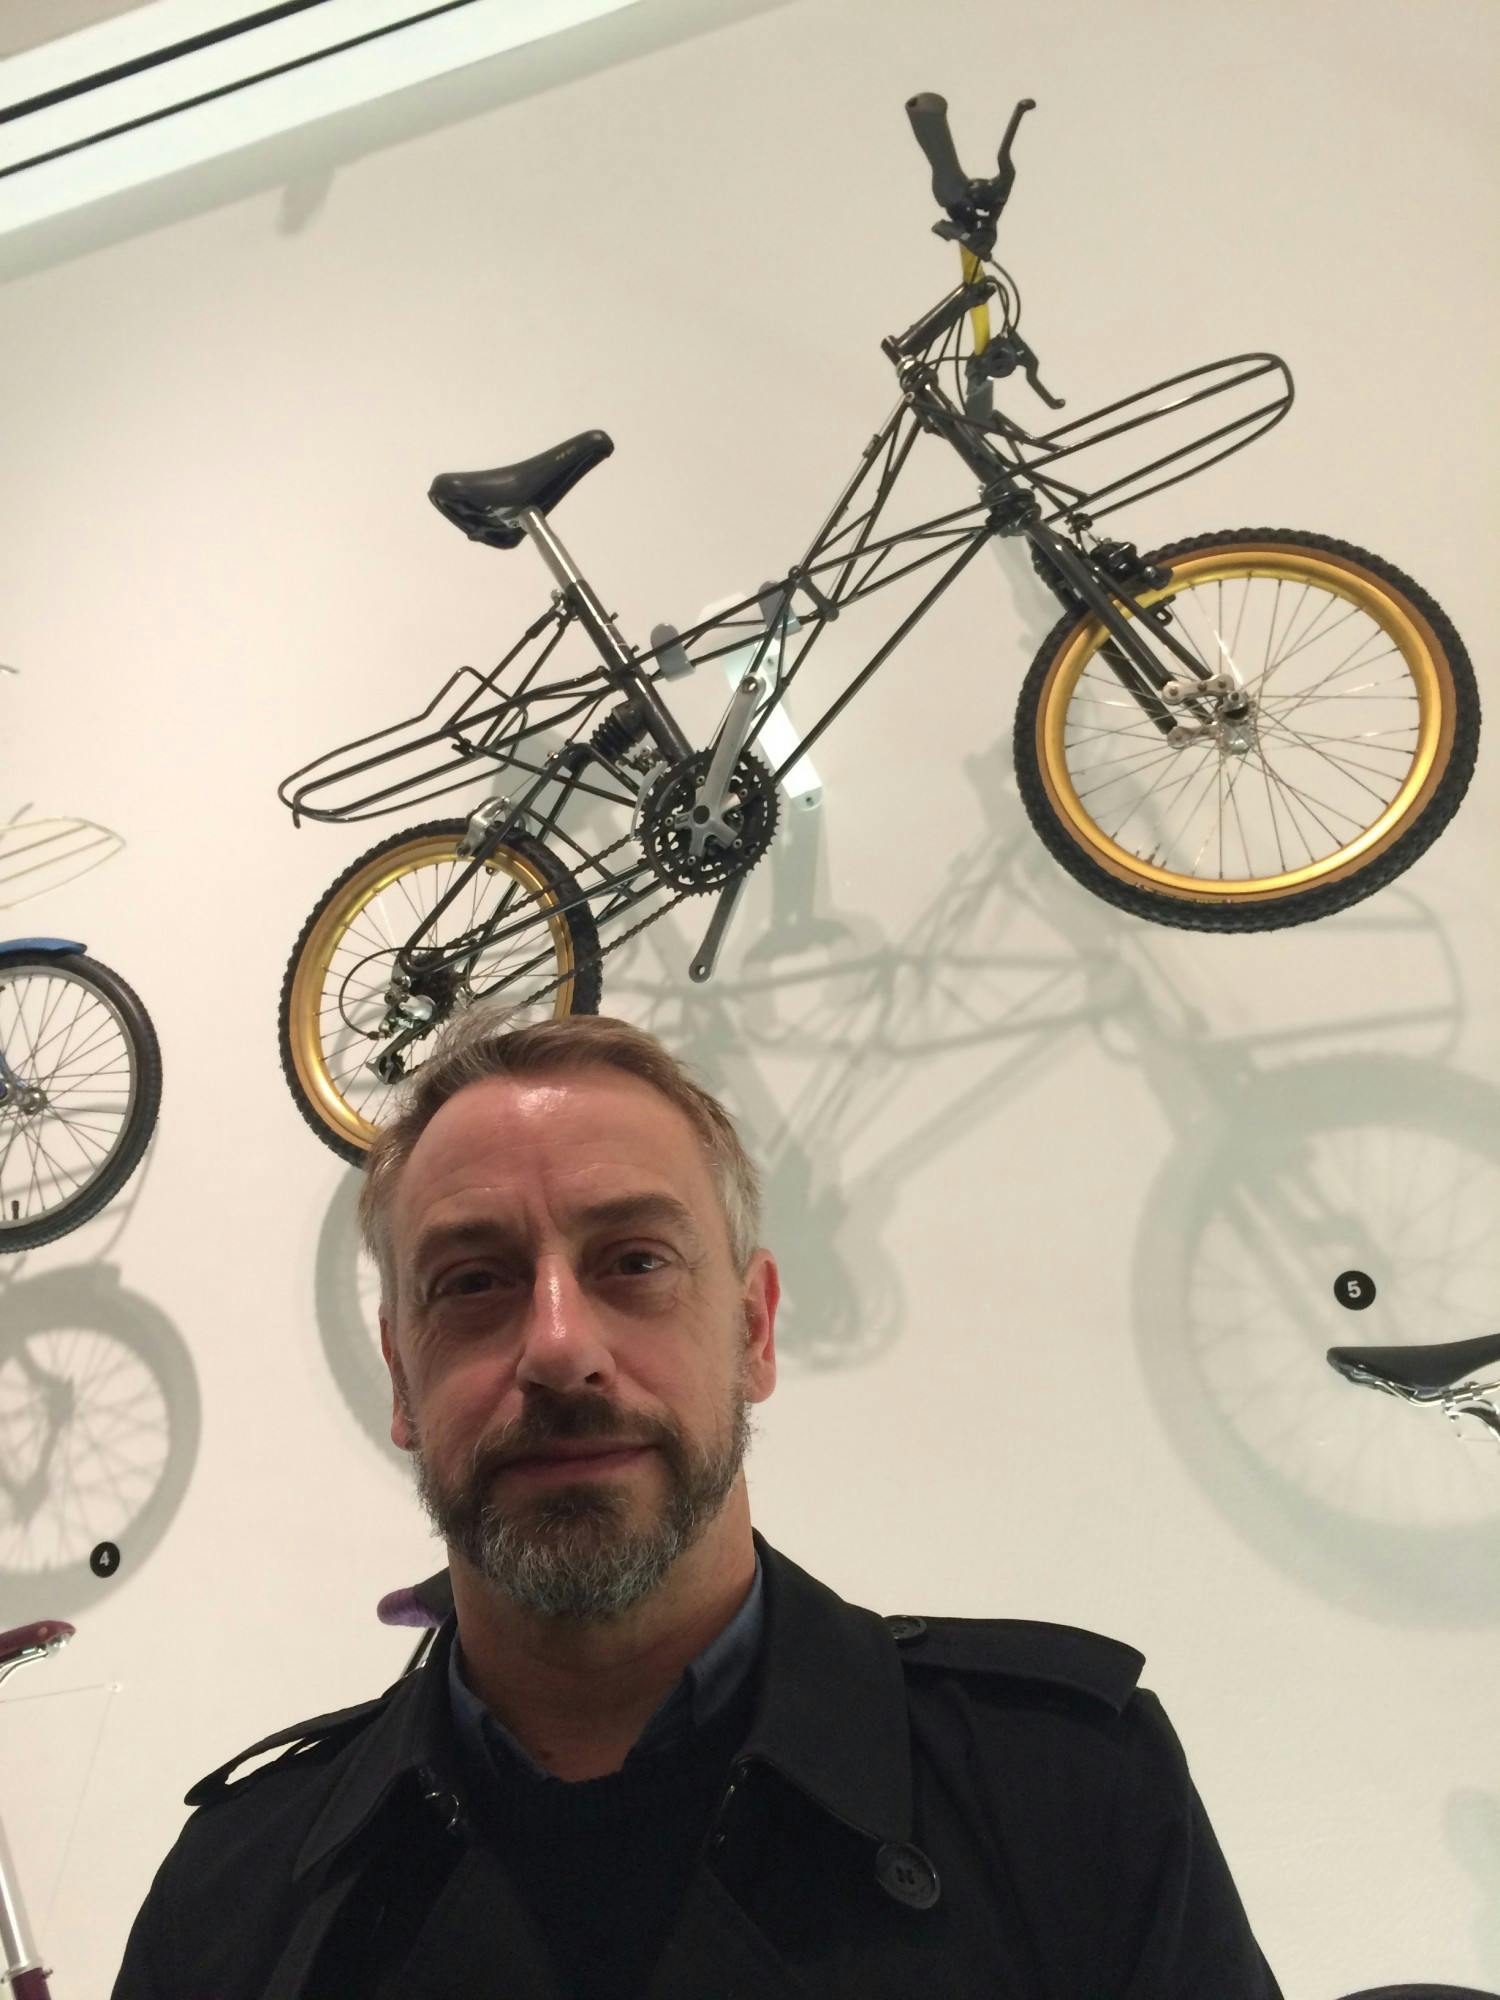 Peter Barker with the the 1987 AM ATB Alex Moulton All Terrain Bicycle at the Design Museum in 2015 the 1987 AM ATB was designed by Alex Moulton with assistance by Peter Barker